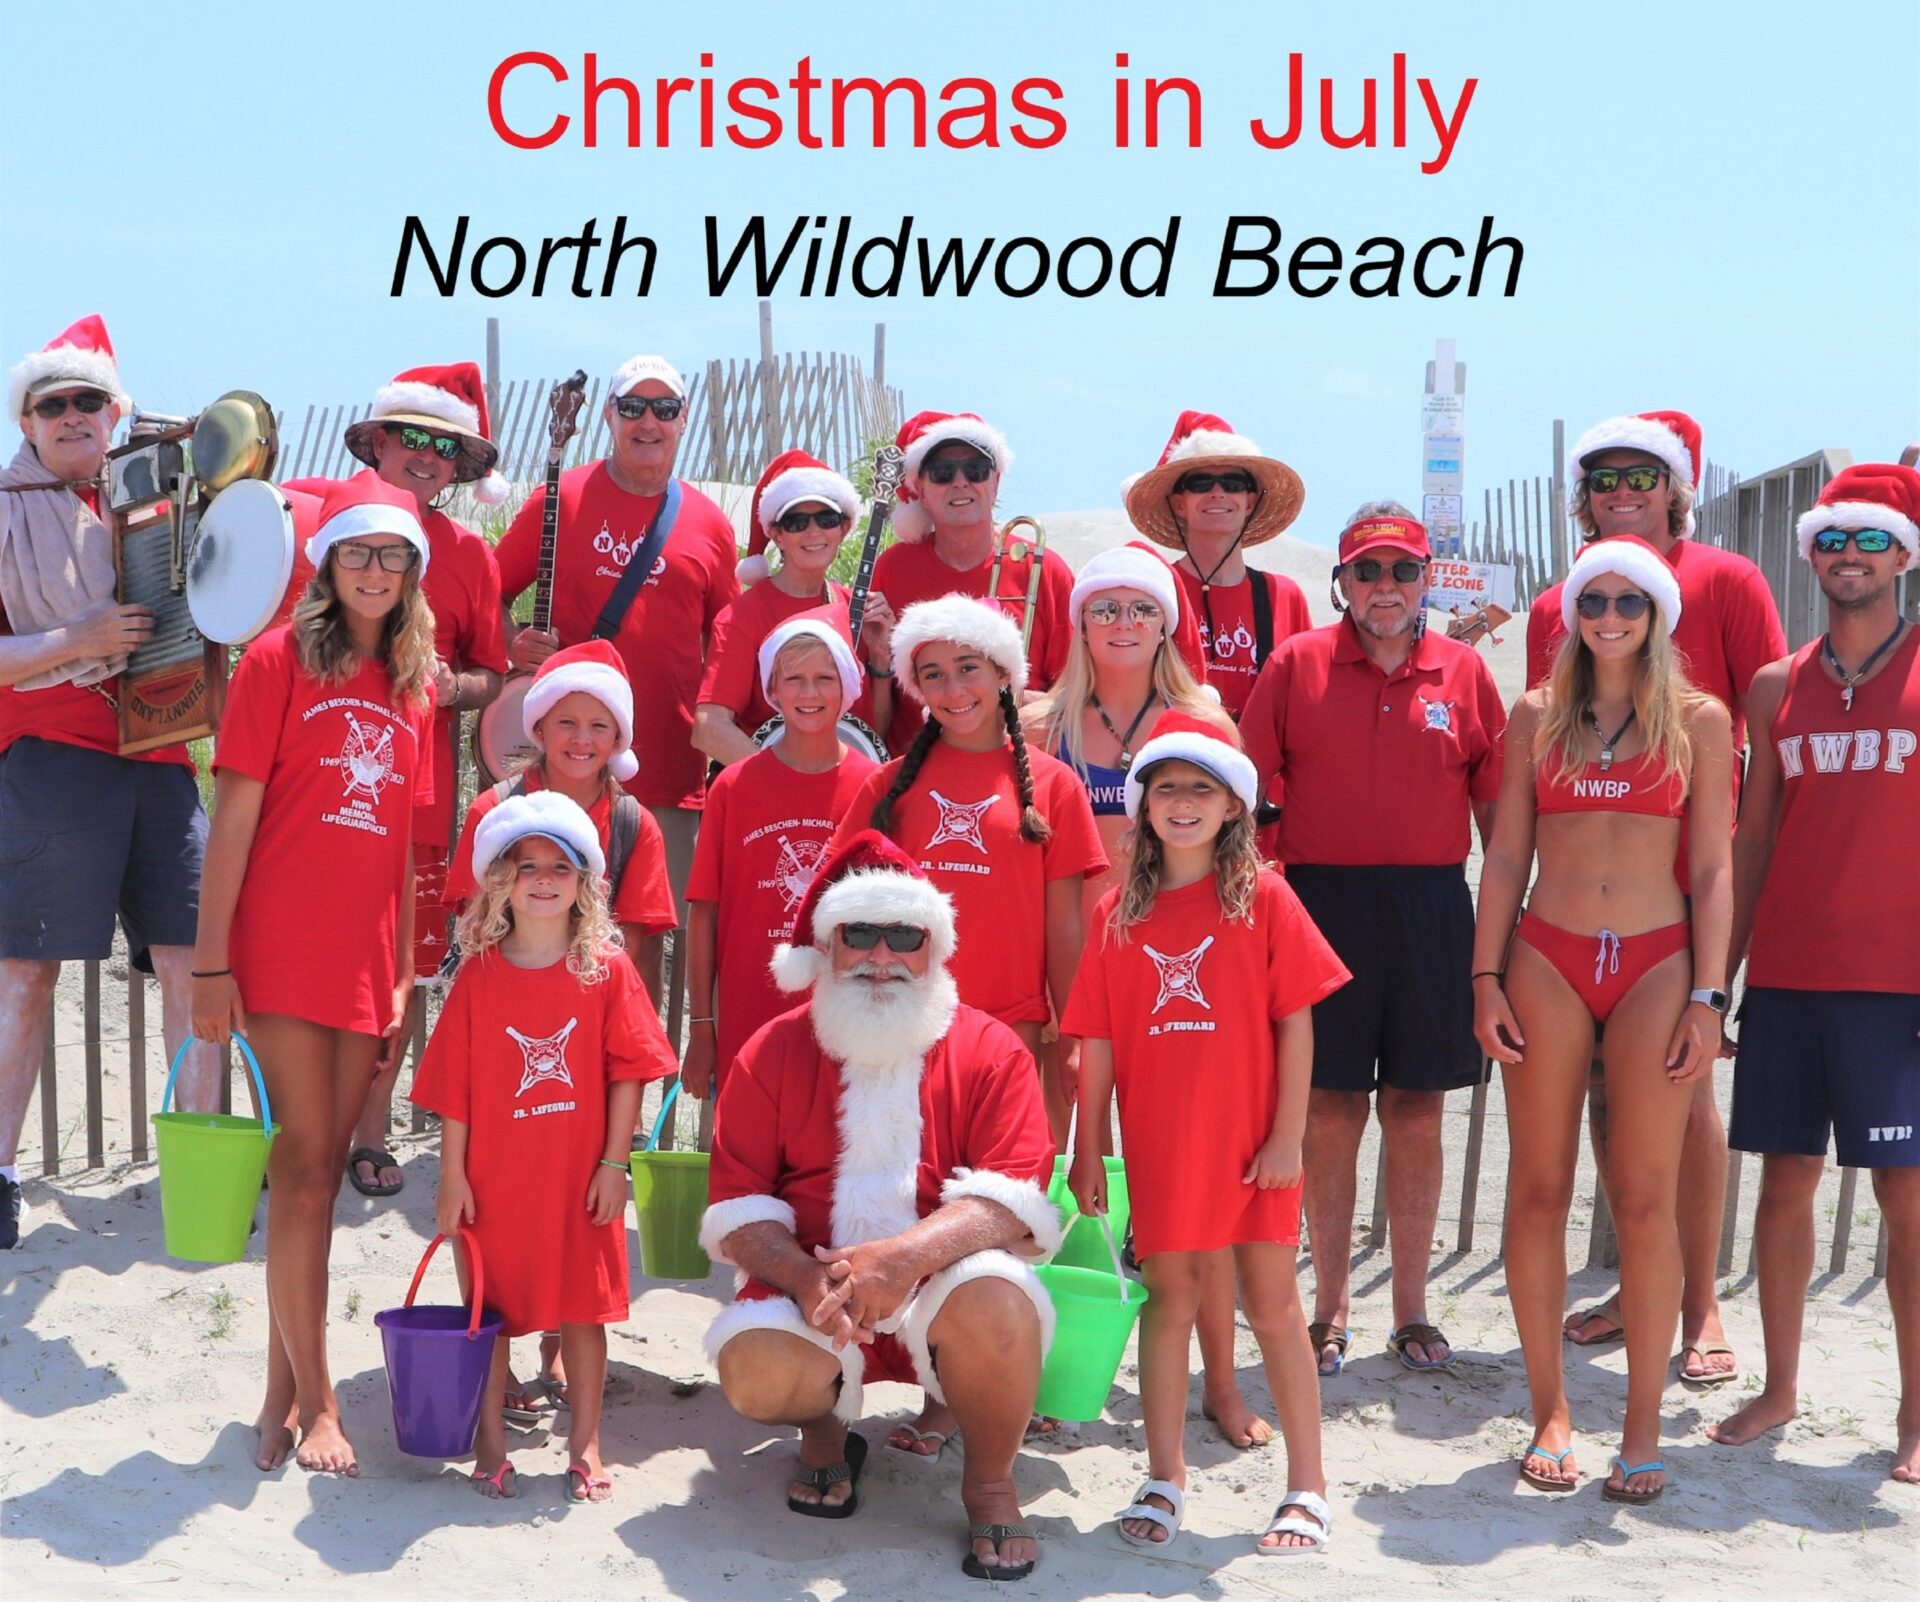 North Wildwood Christmas in July with Santa Claus